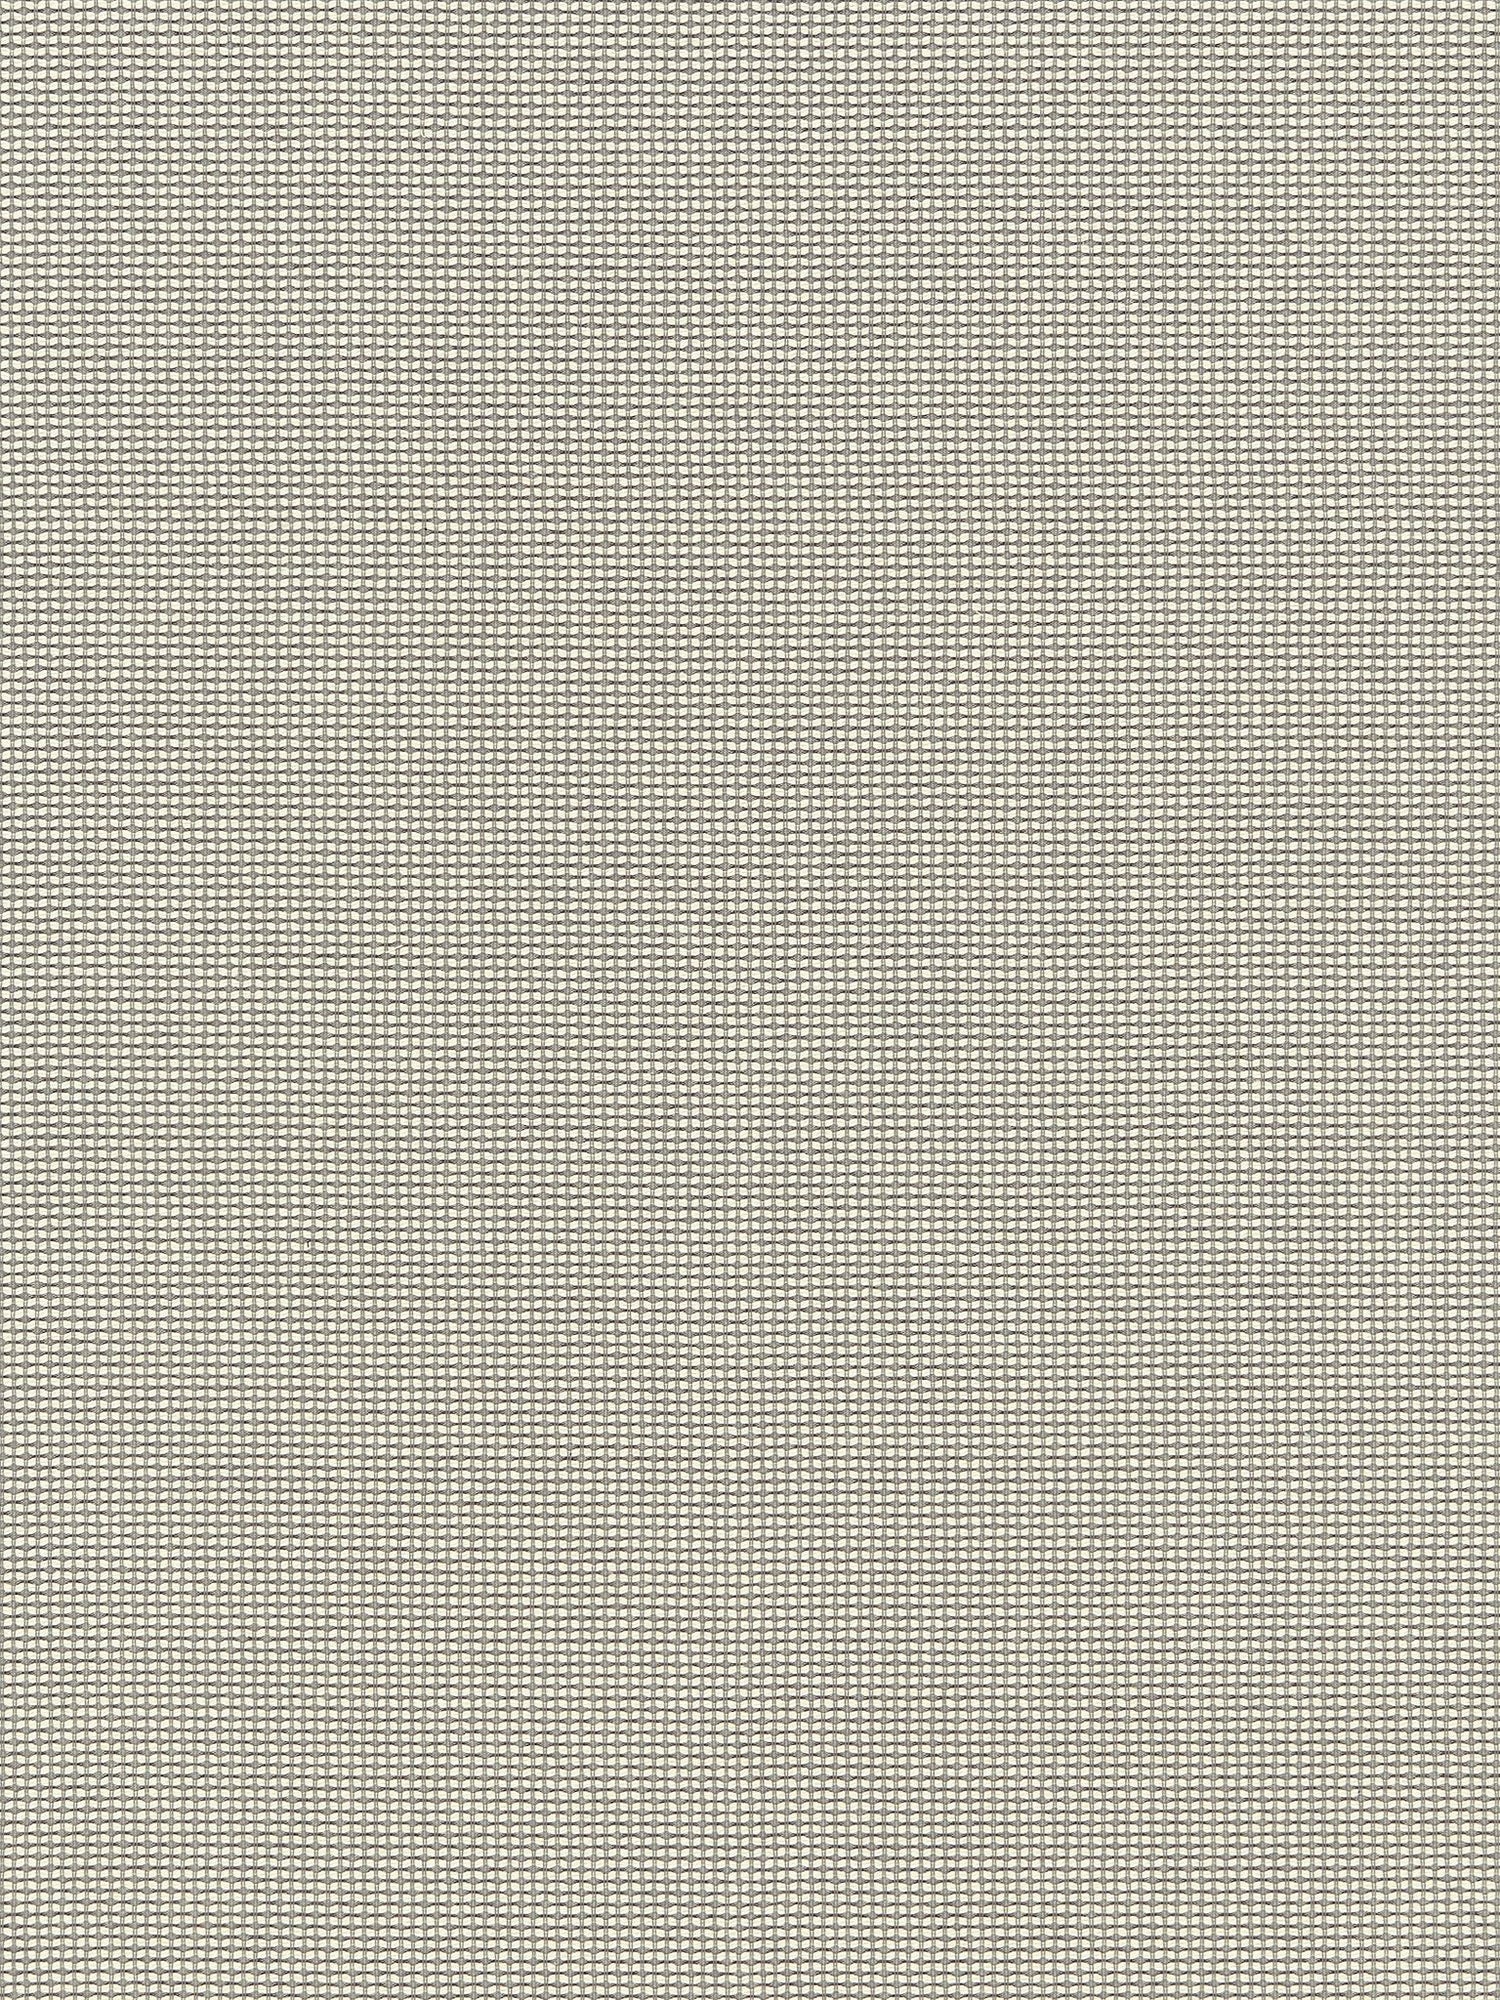 Cortland Weave fabric in taupe color - pattern number BK 0003K65119 - by Scalamandre in the Old World Weavers collection